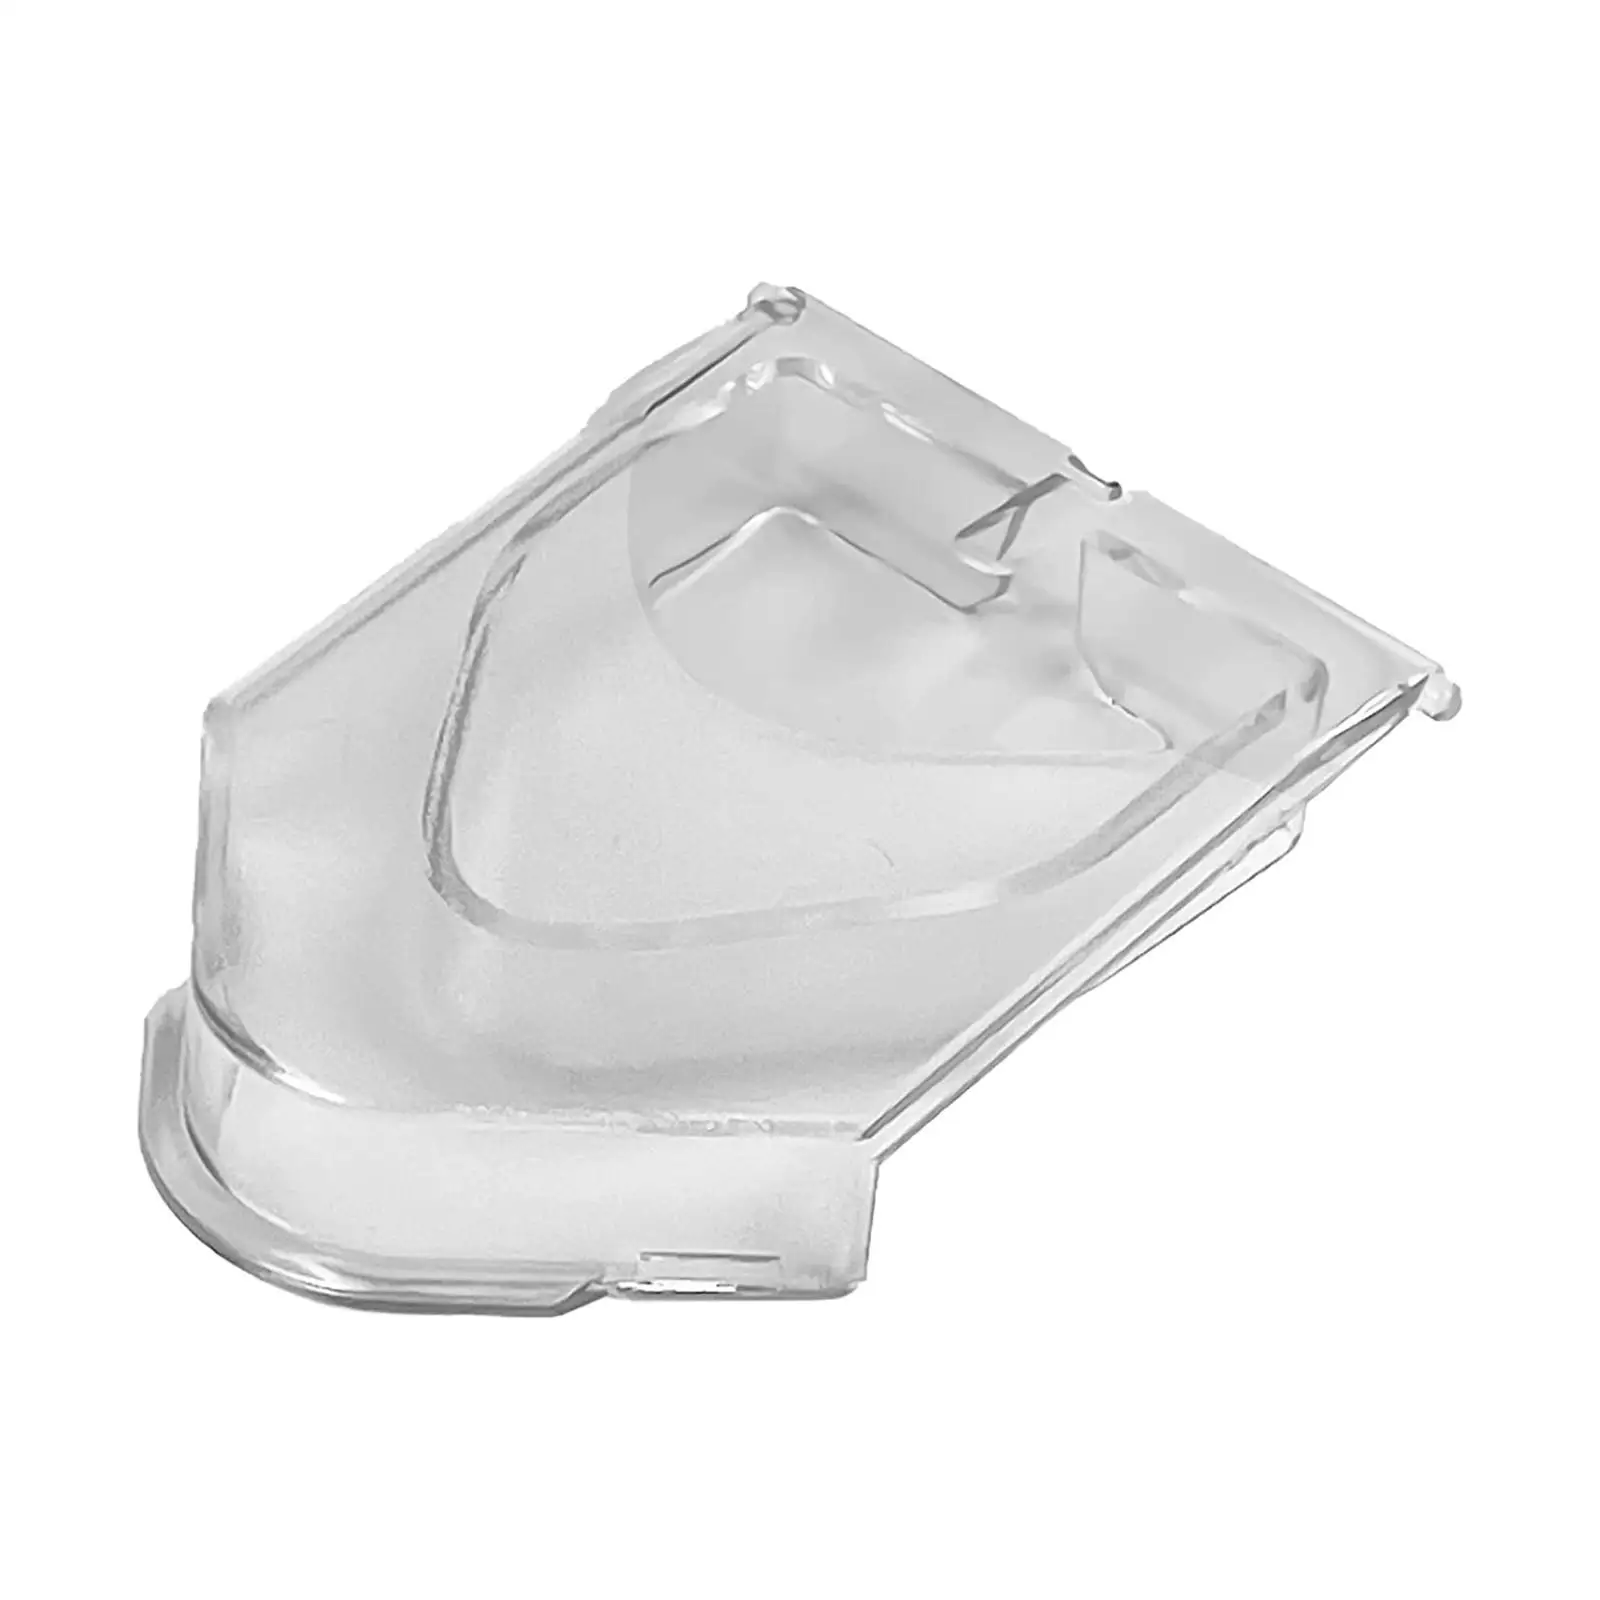 Juicer feed Cover Portable Transparent Cover Replacement Home Kitchen Small Appliance Juicer Accessories for NJ600 Series Juicer images - 6